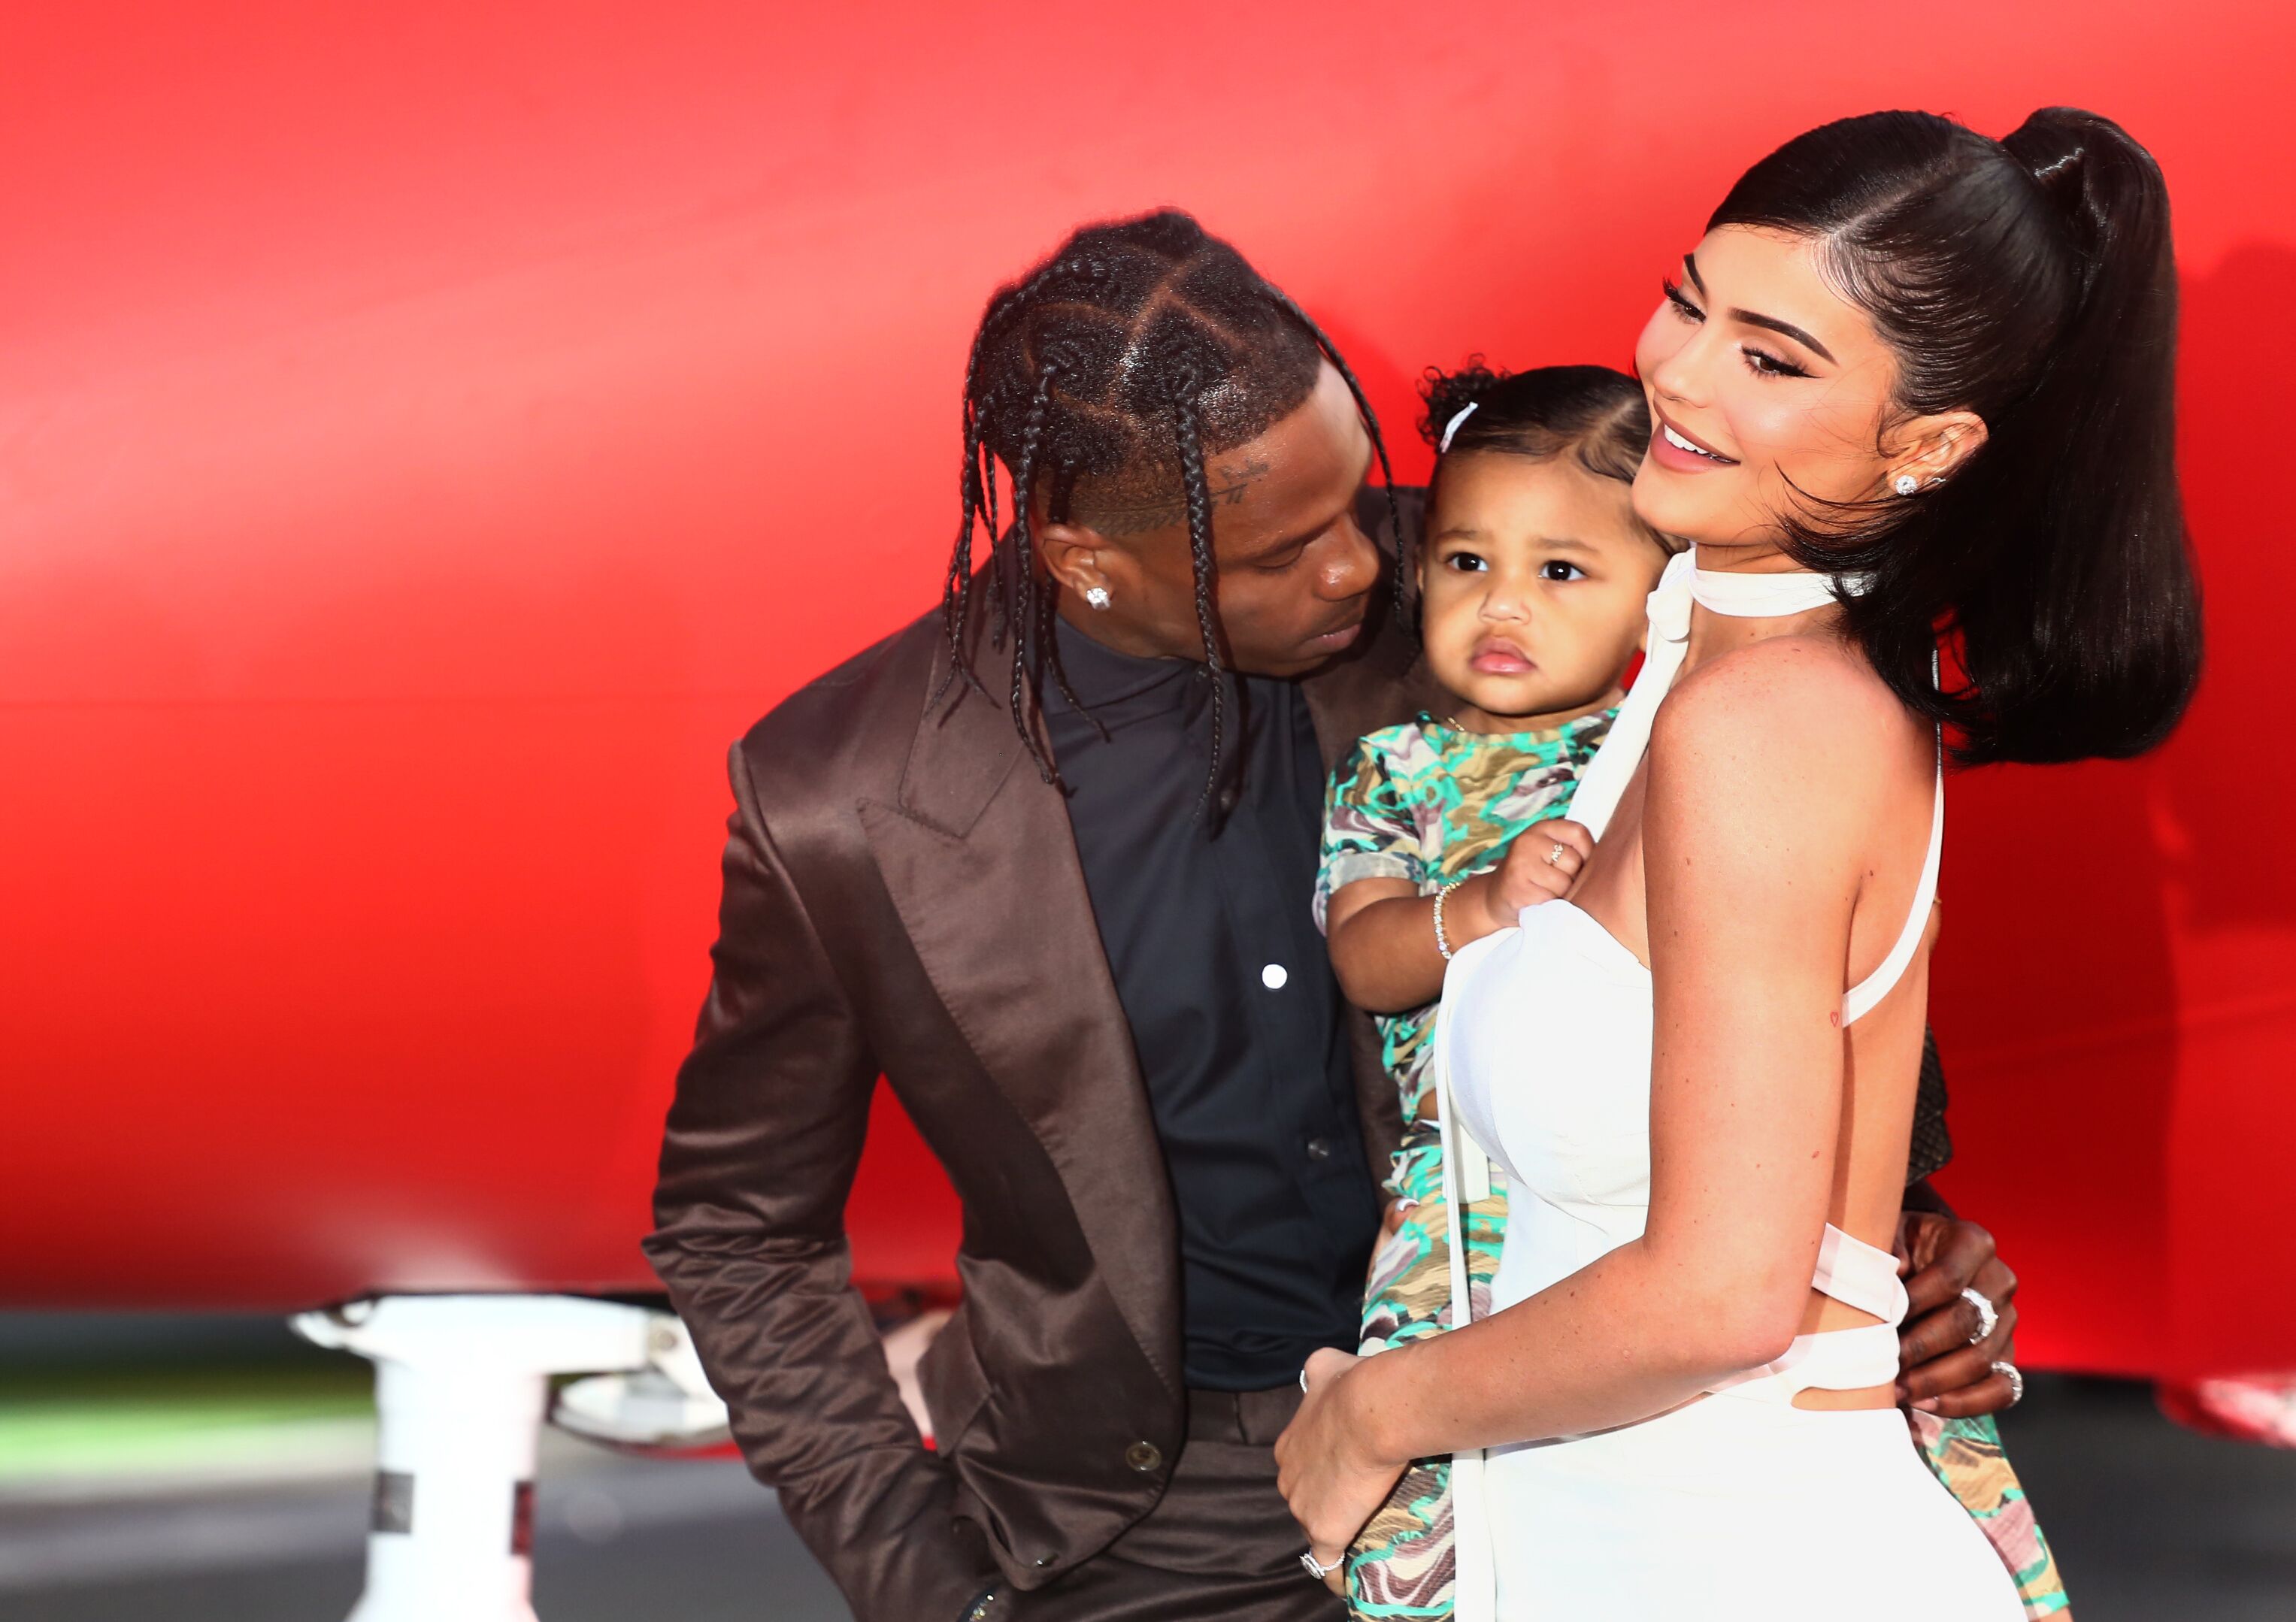  Travis Scott and Kylie Jenner attend the Travis Scott: "Look Mom I Can Fly" Los Angeles Premiere at The Barker Hanger on August 27, 2019 | Photo: Getty Images